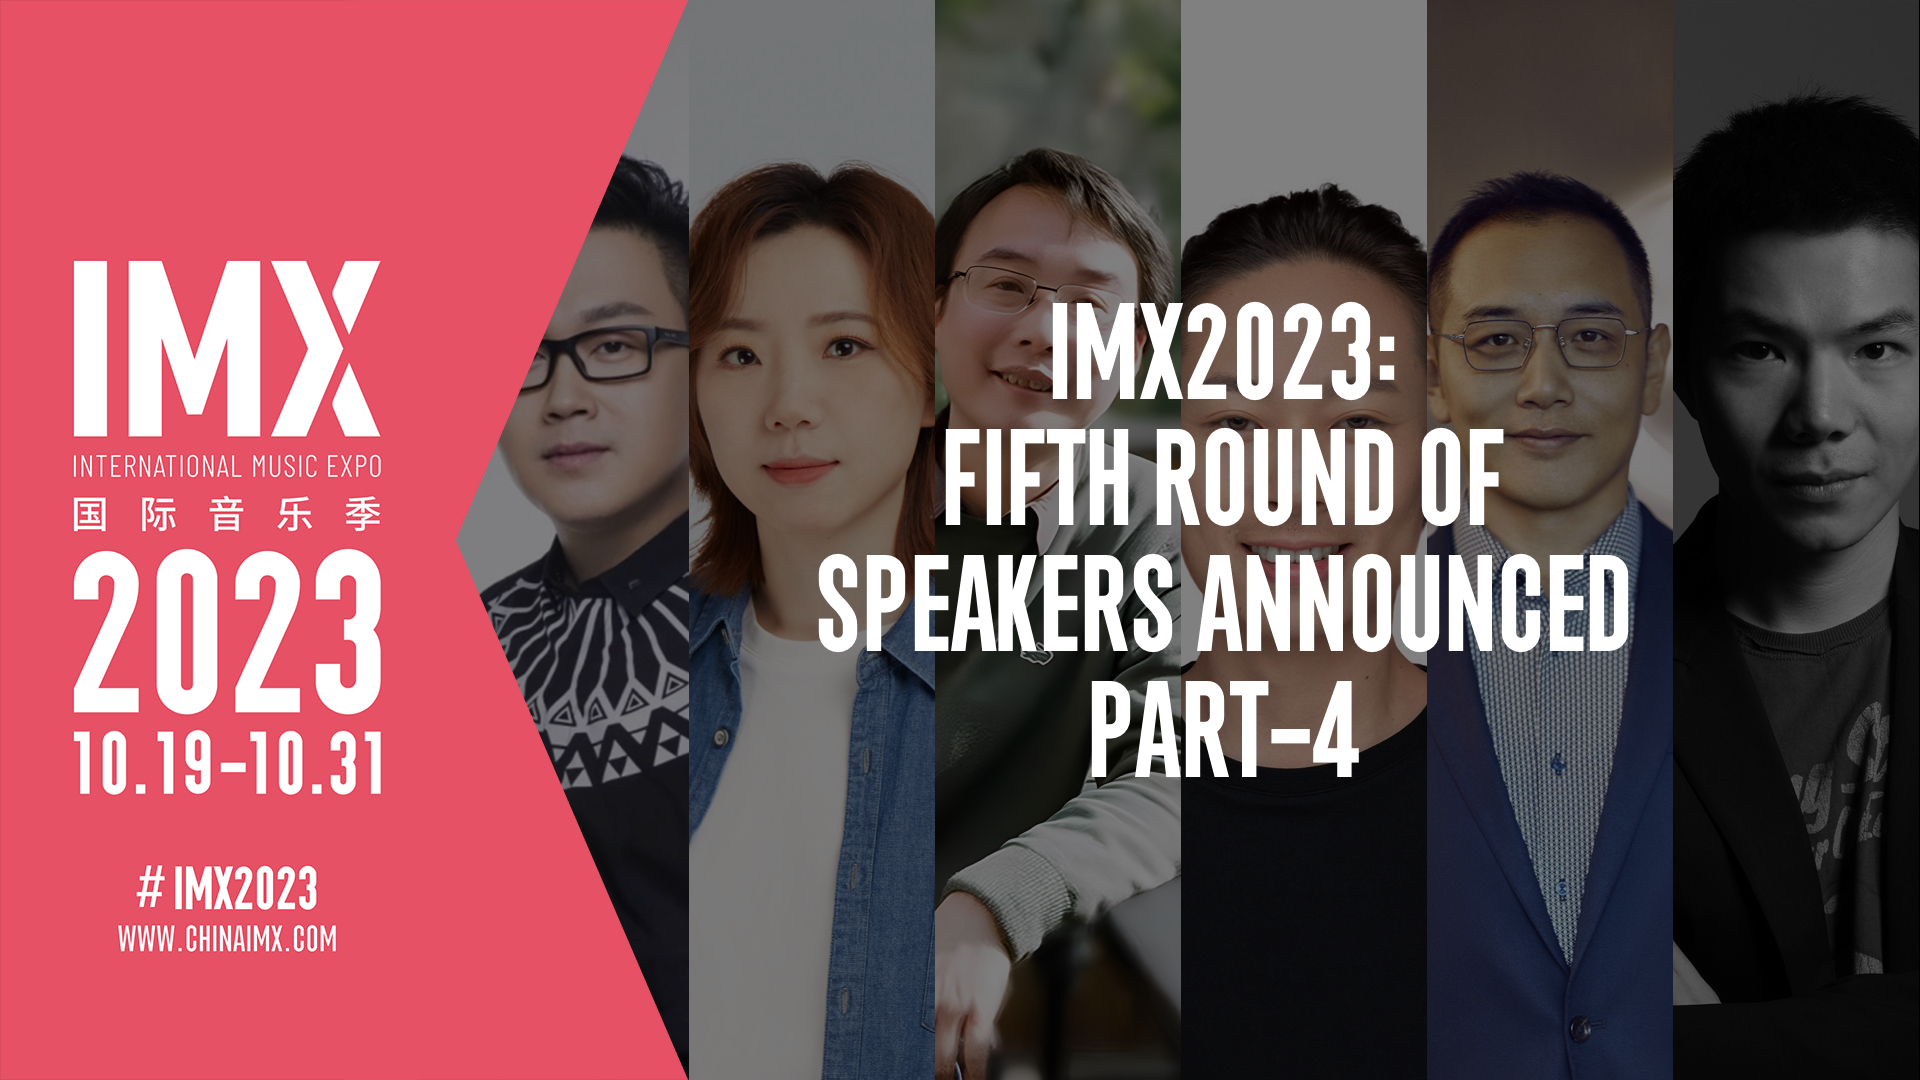 IMX 2023 Fifth Round of Speakers Part 4